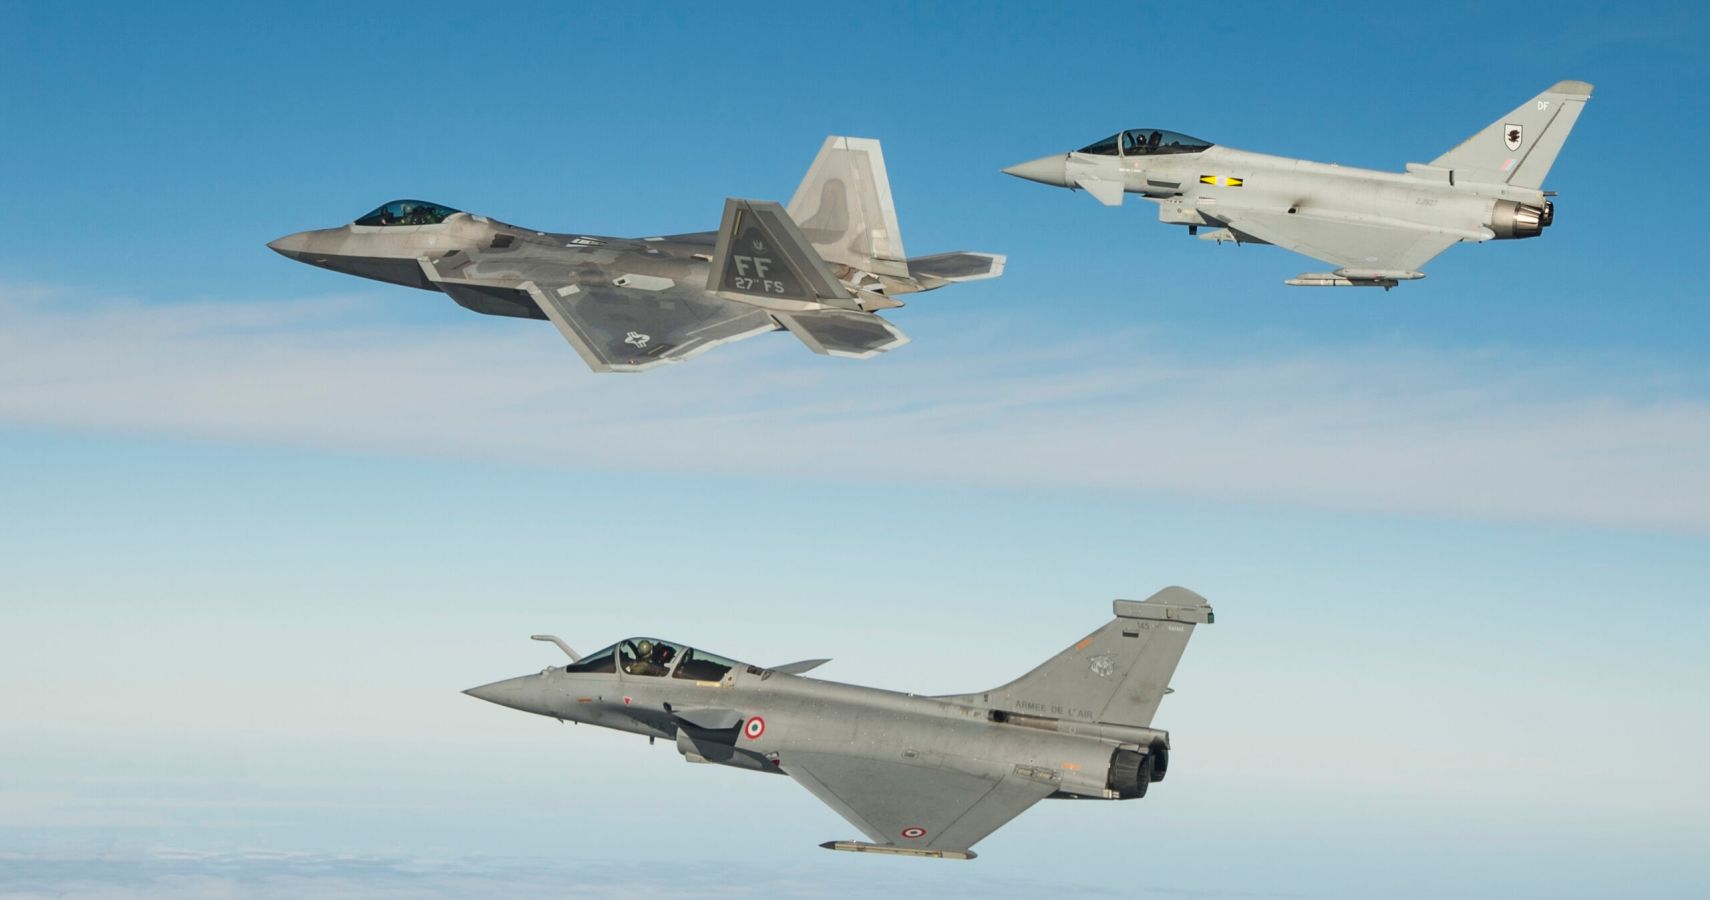 Here’s How The F-22 Raptor Fares Against The Eurofighter Typhoon